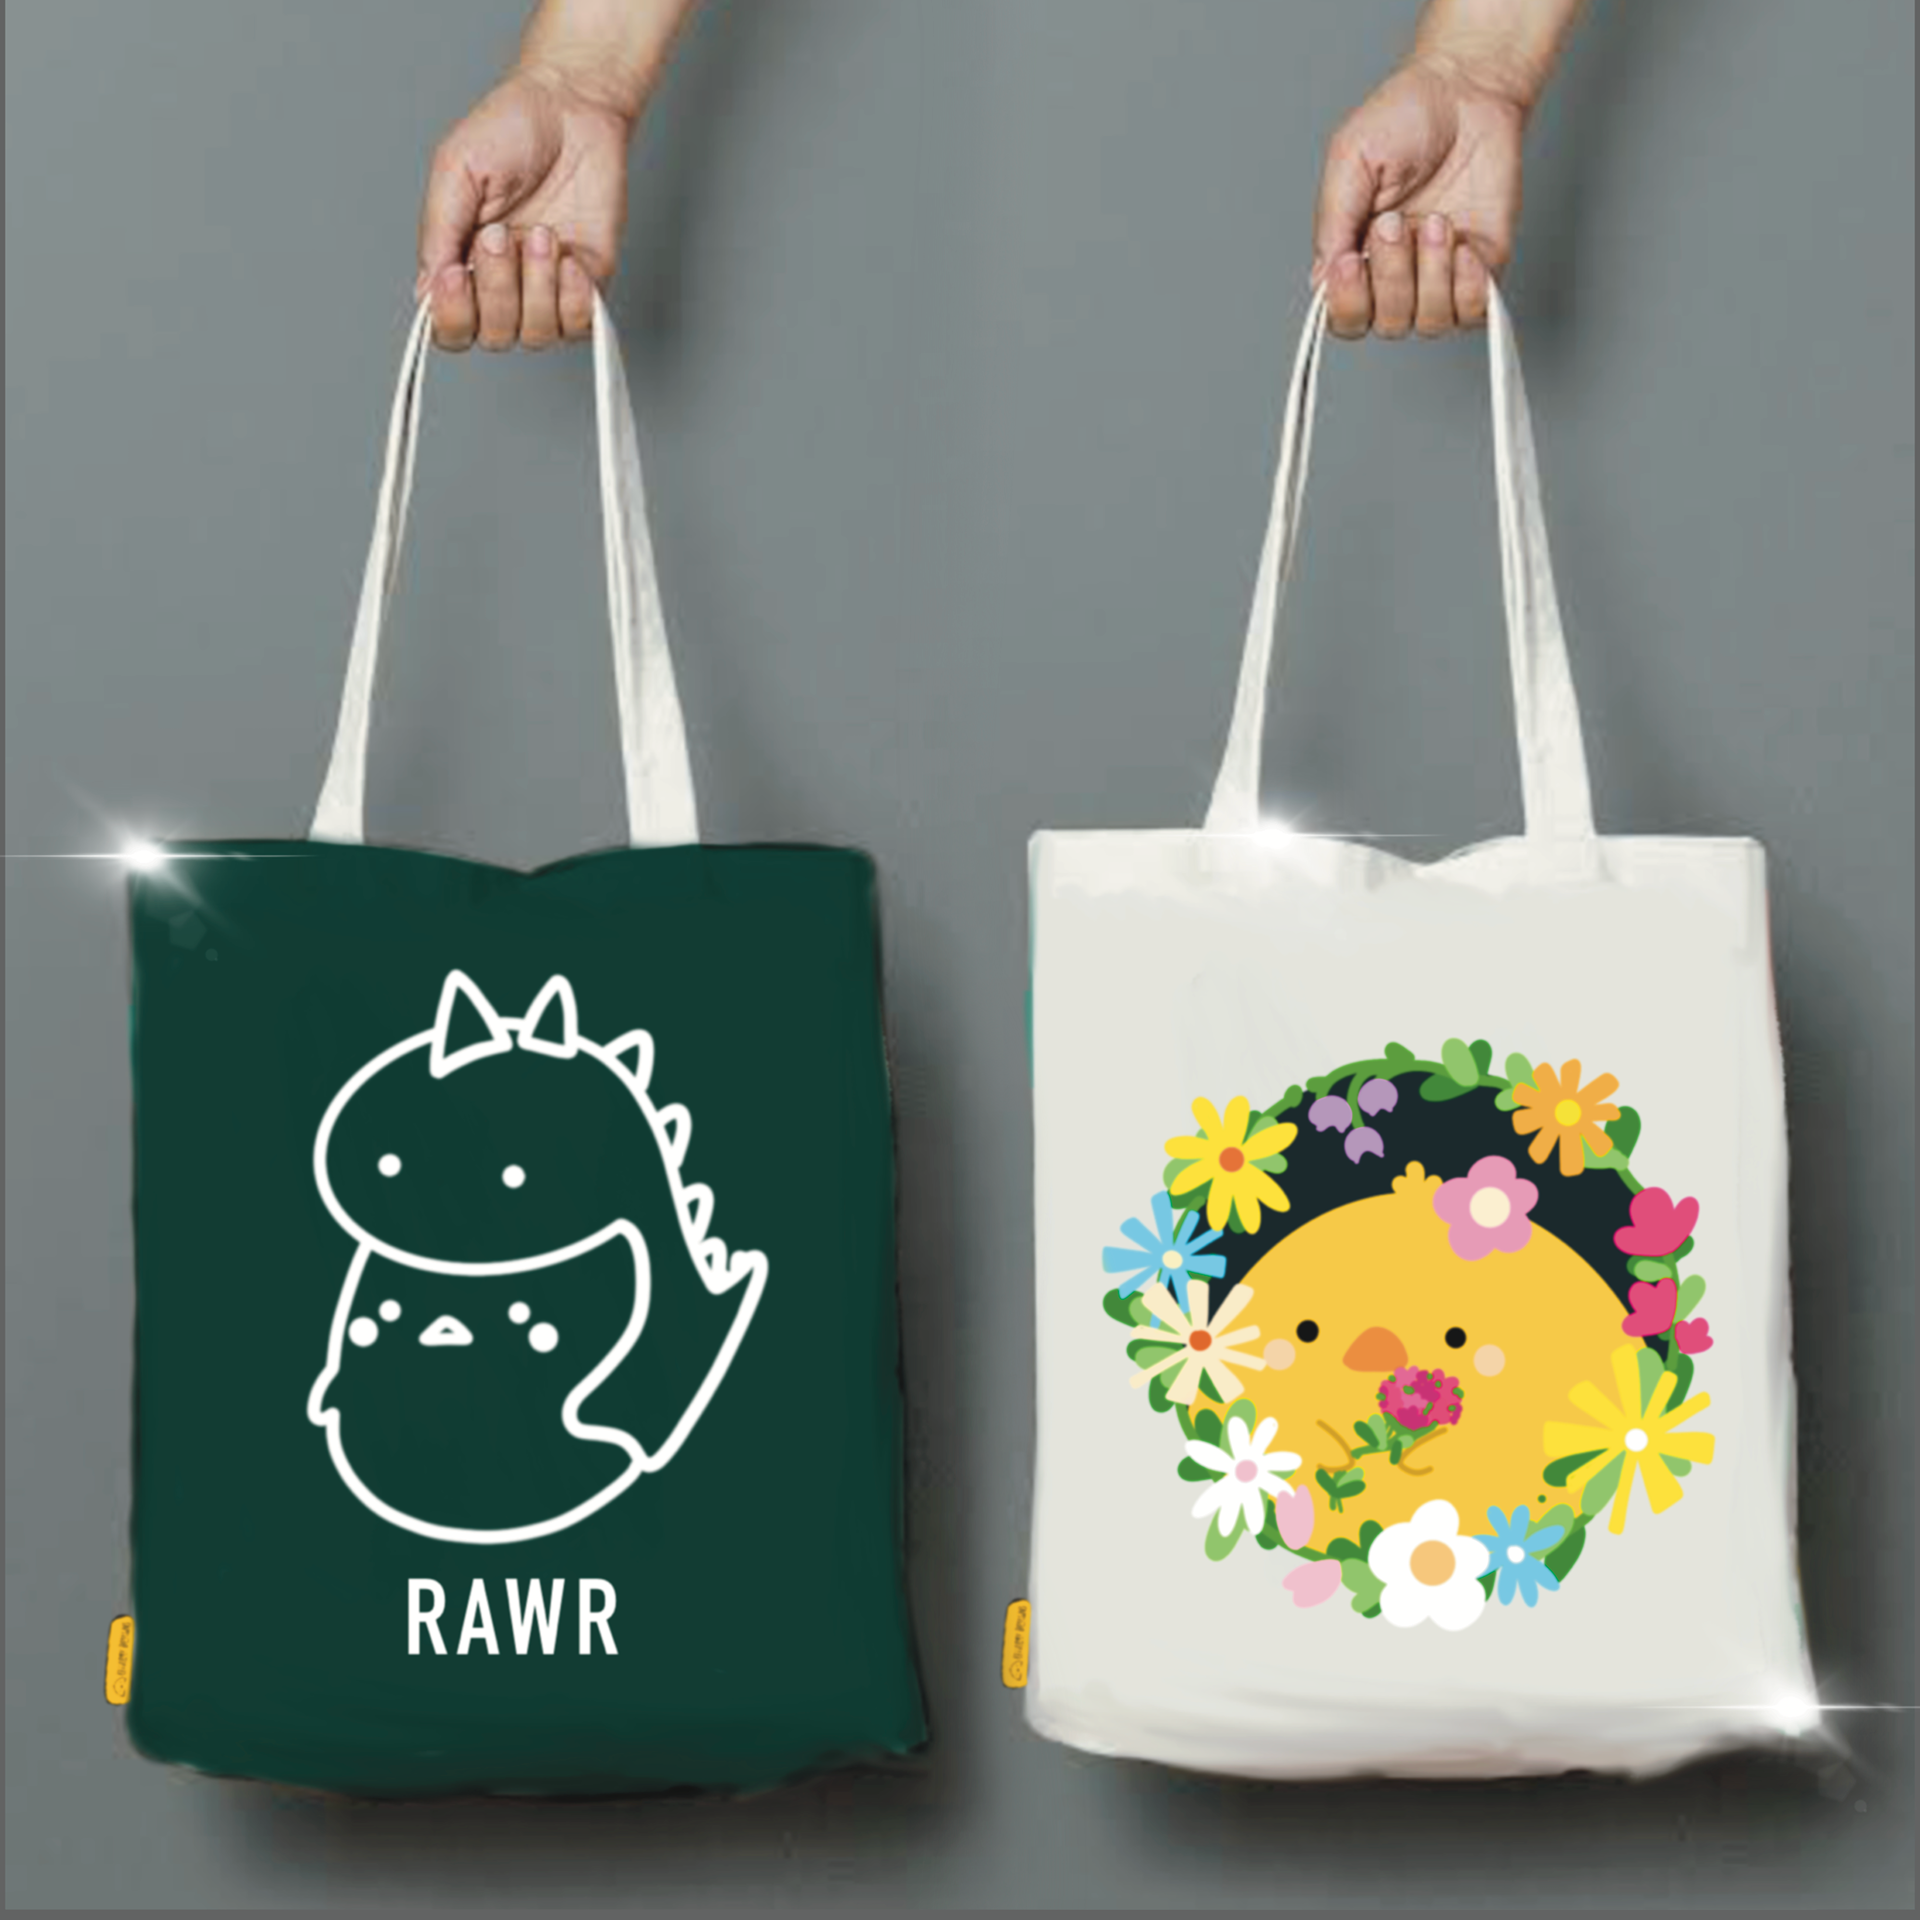 Littlory Designs New Tote Bags